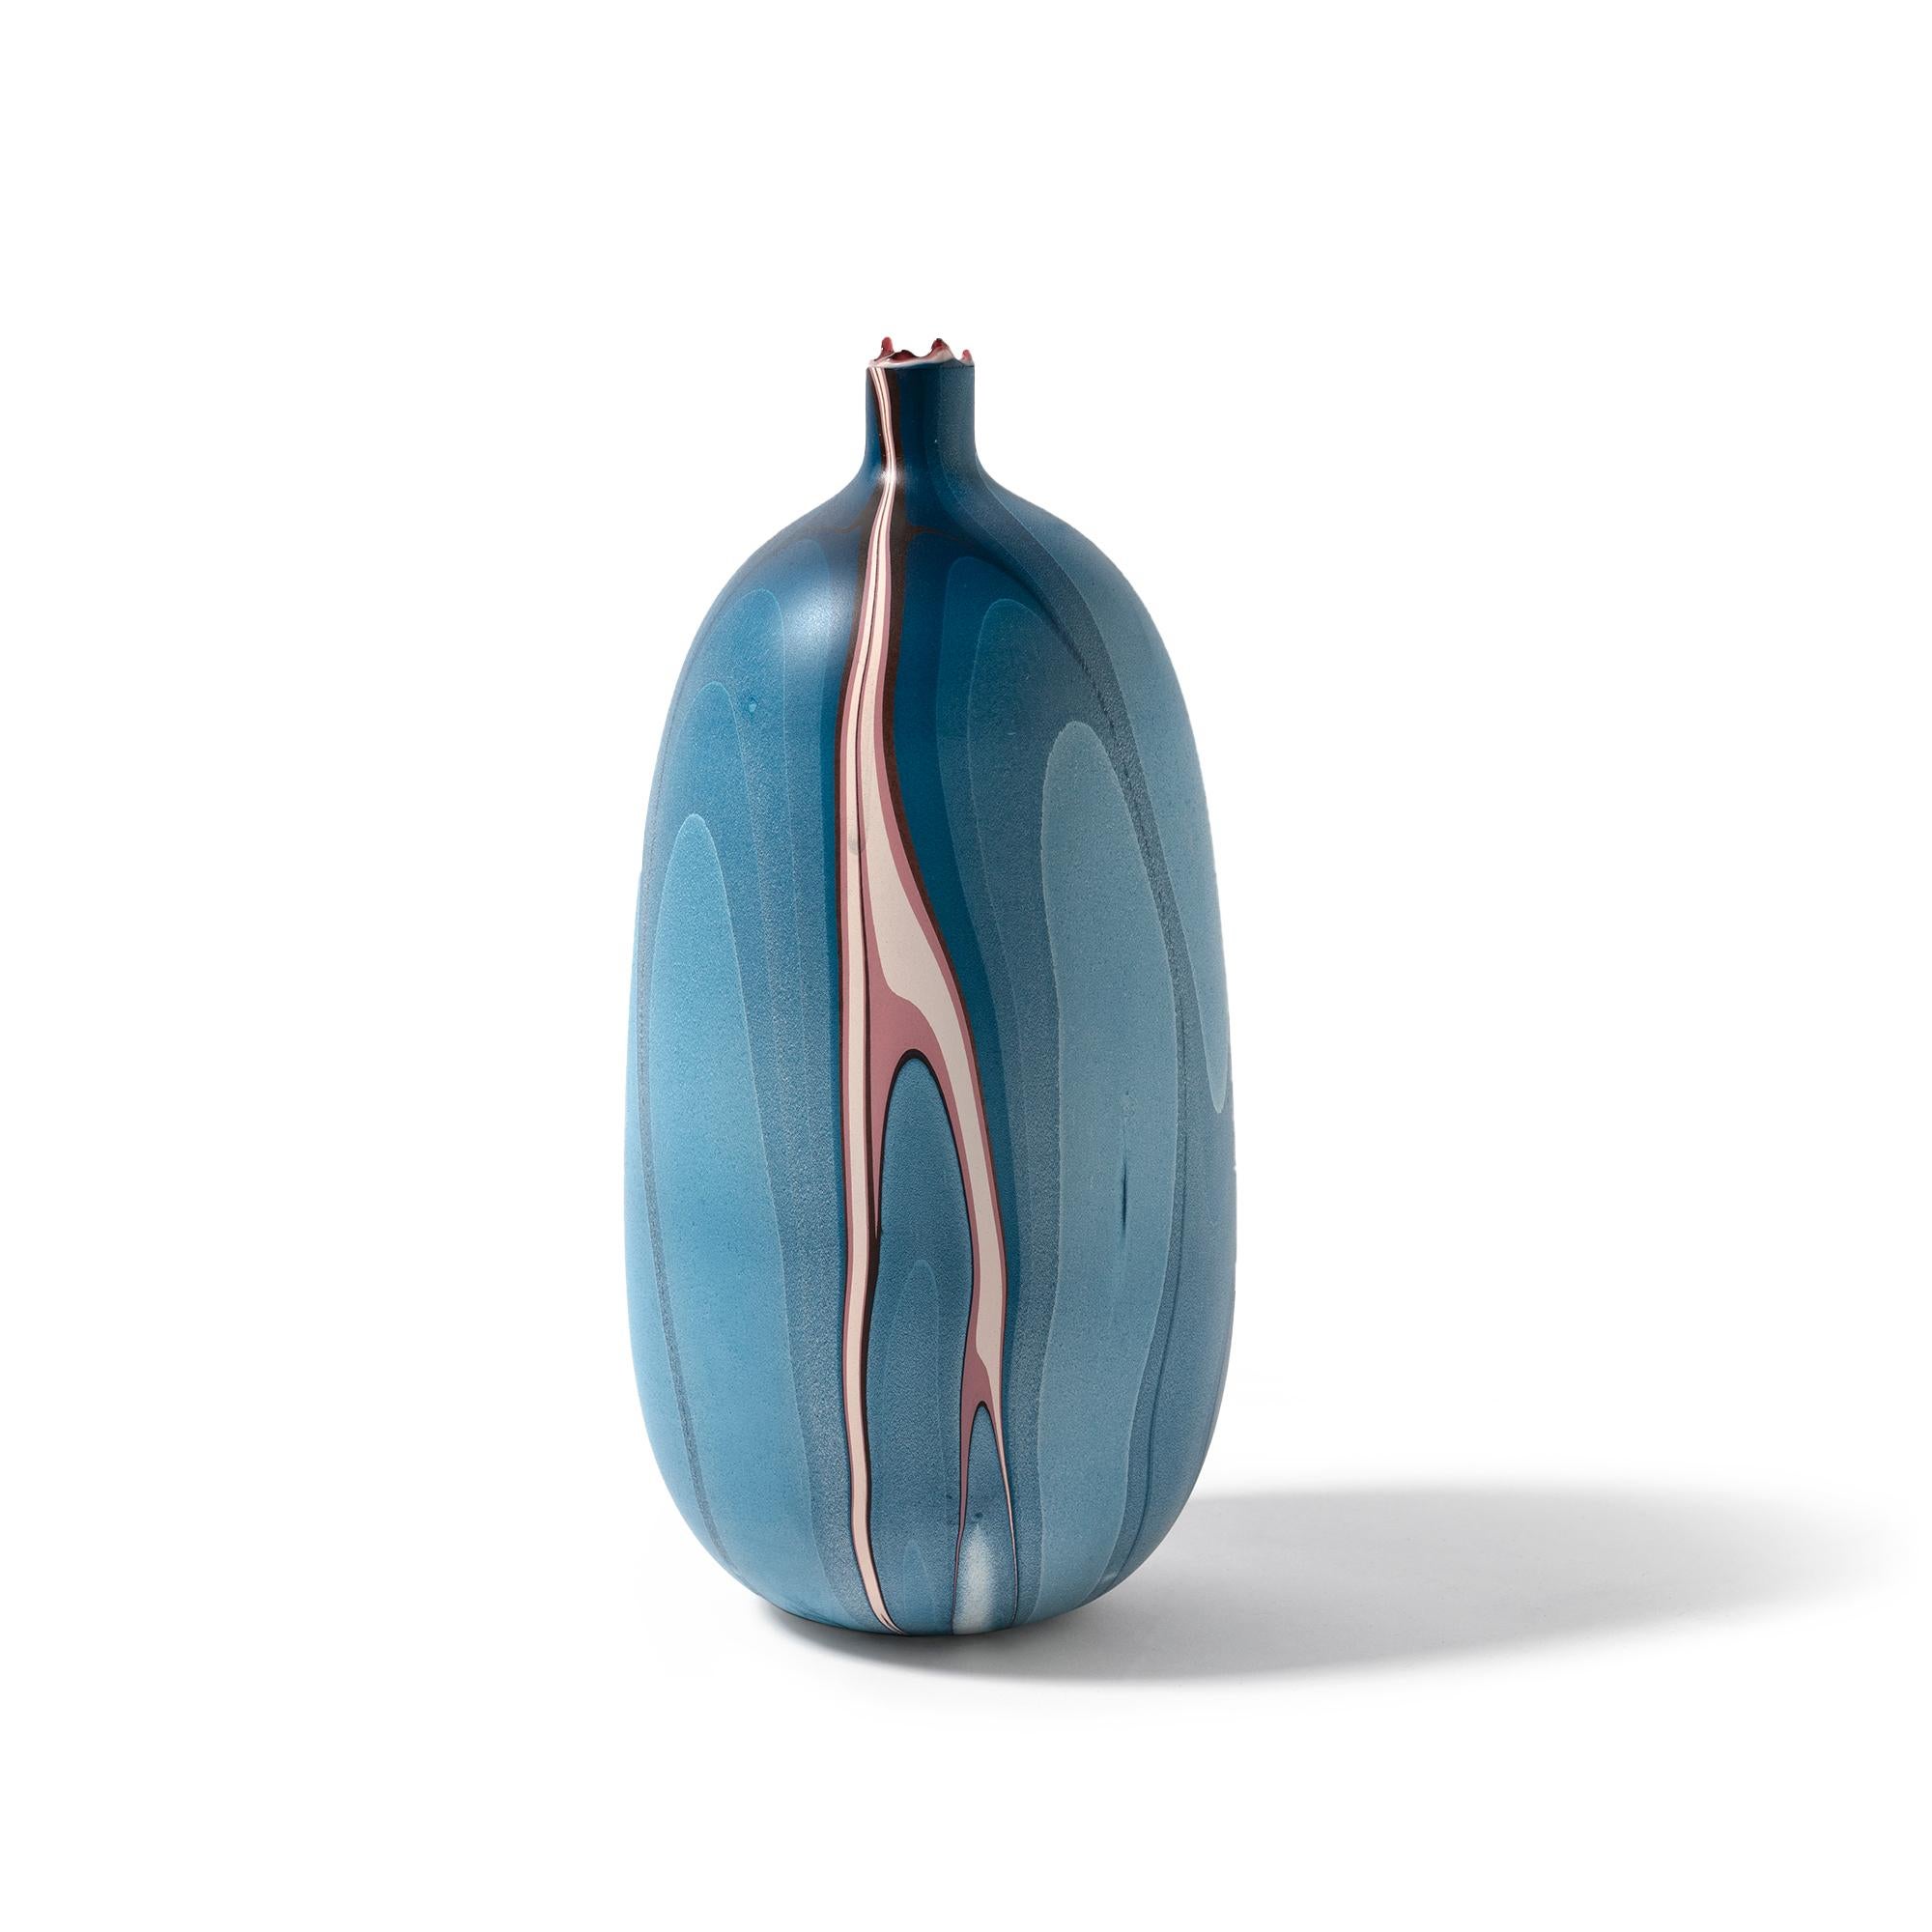 Mississippi Oblong hydro vase by Elyse Graham.
Dimensions: W 14 x D 14 x H 29 cm
Materials: plaster, resin
Molded, dyed, and finished by hand in LA. Customization
Available.
All pieces are made to order.

Our new Hydro Vases take on a